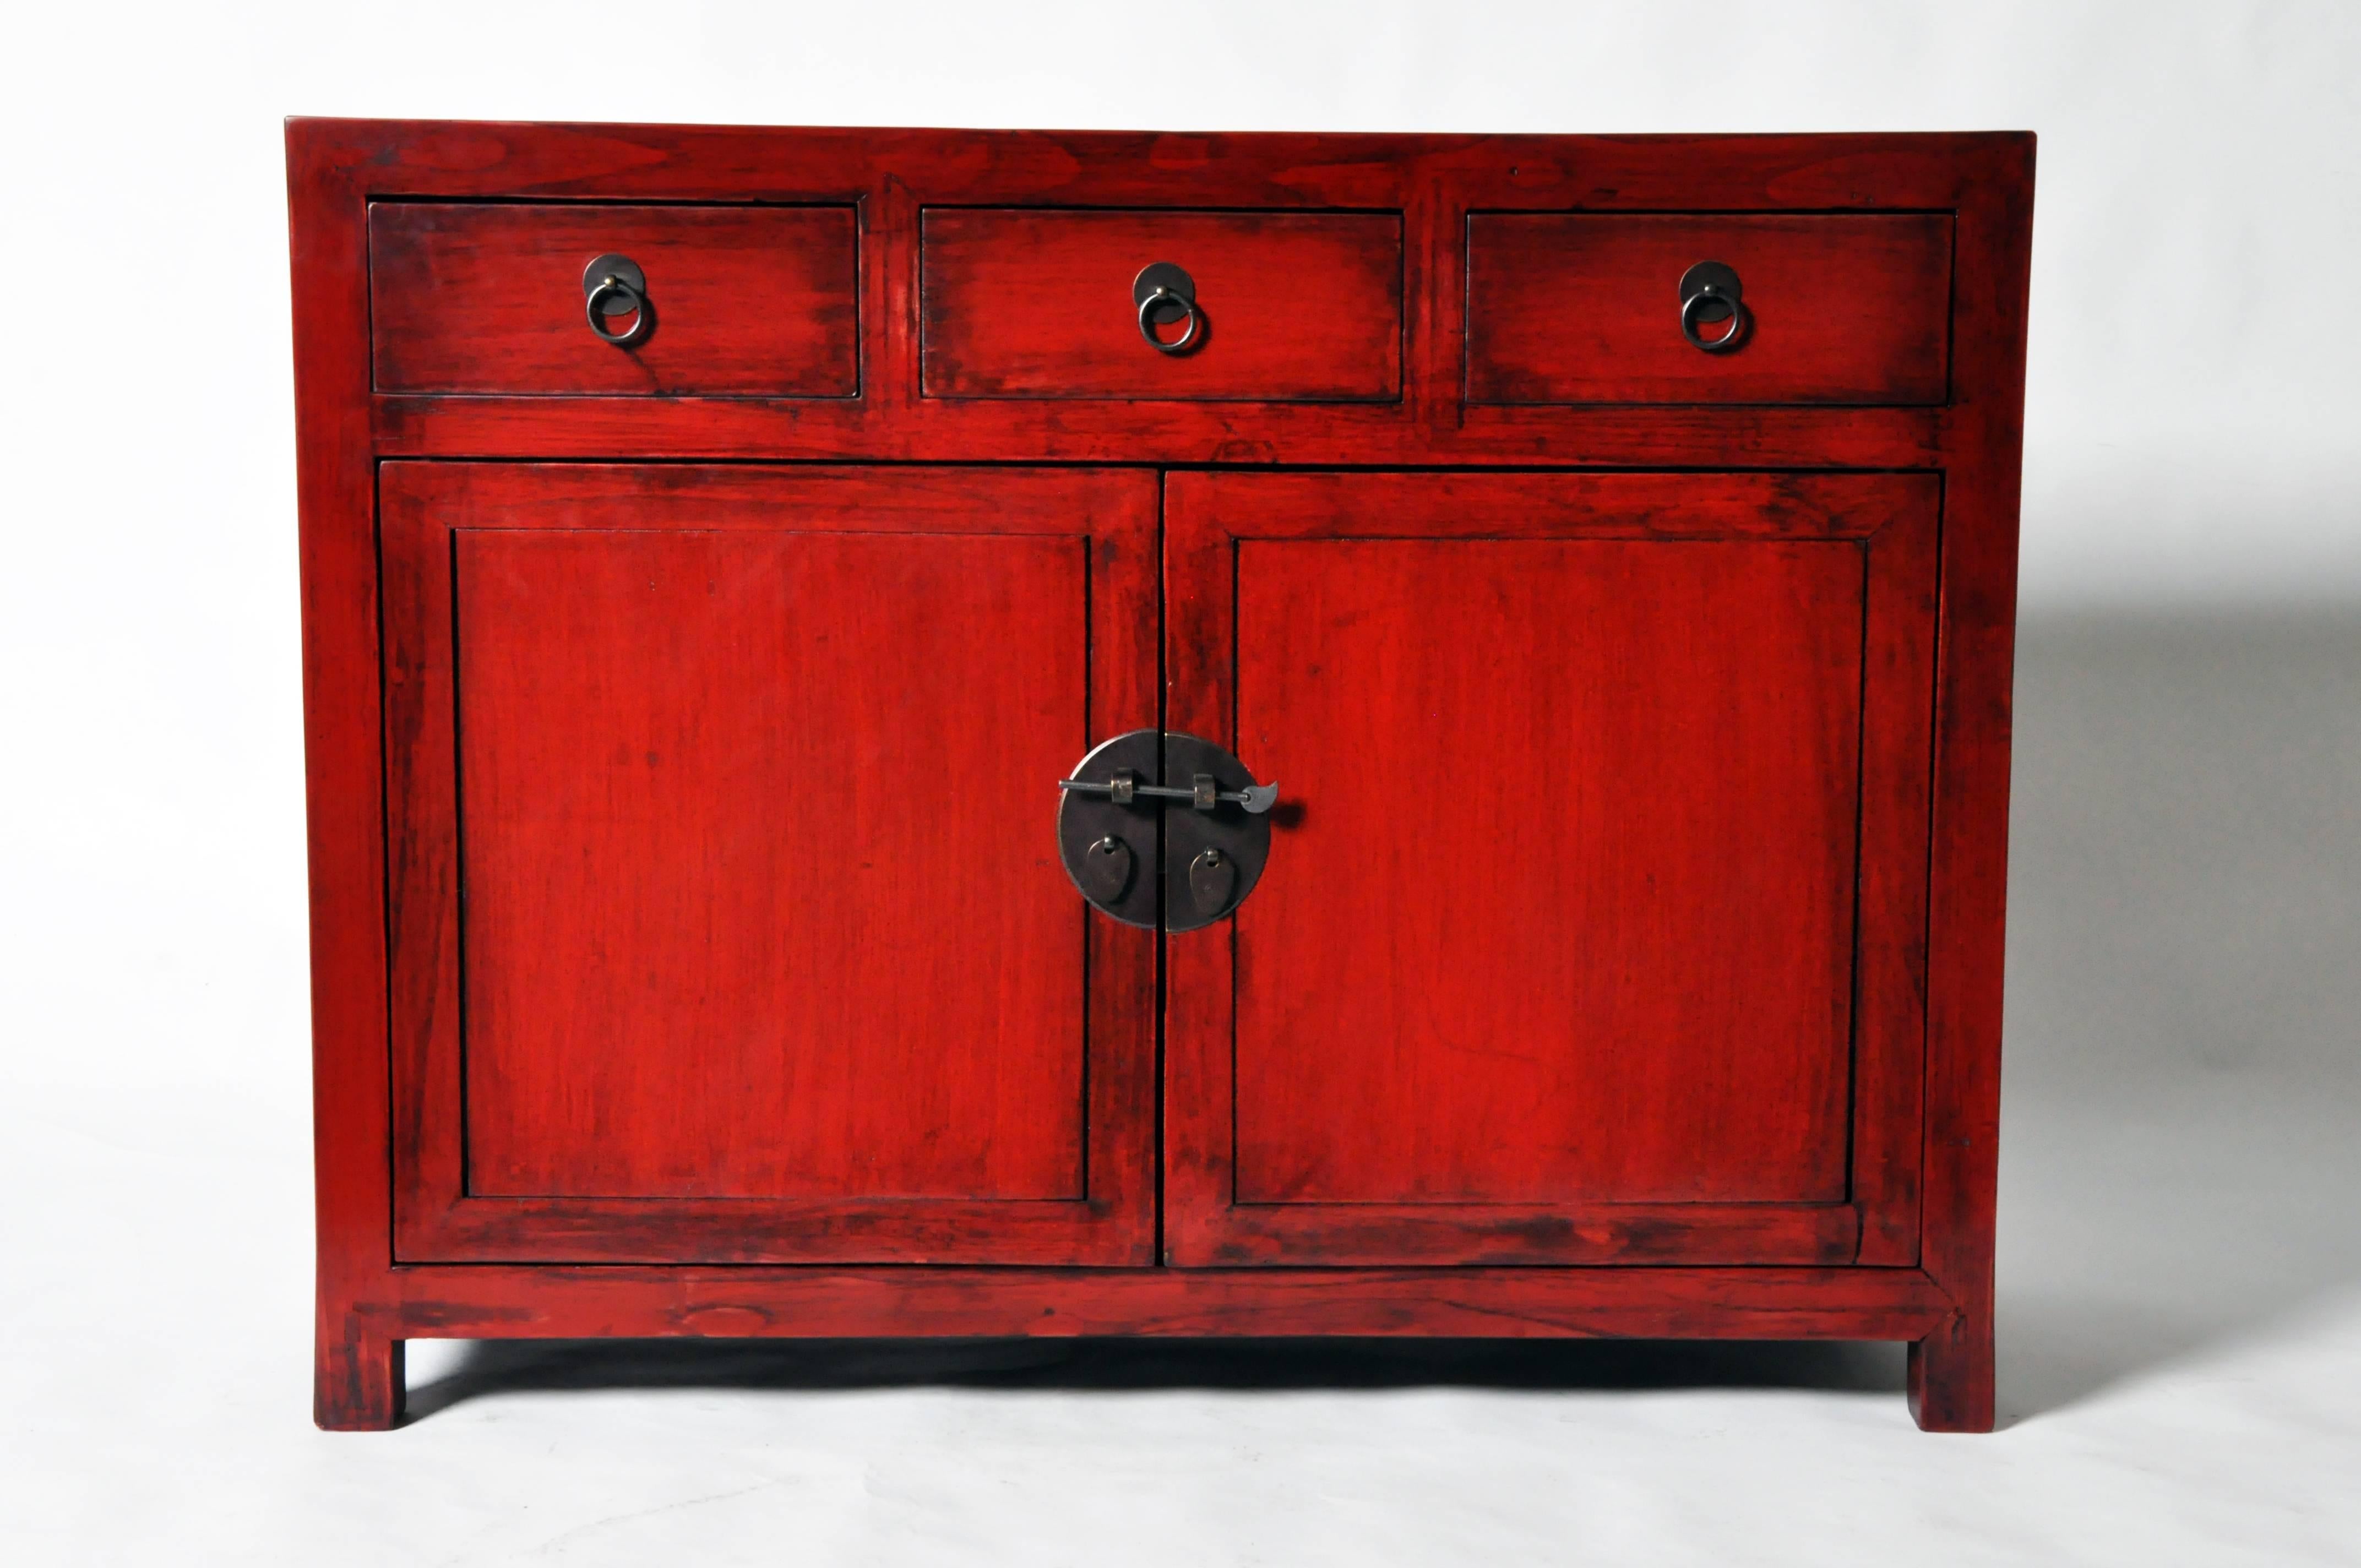 This Chinese side chest is from Henan, China and is made from elmwood and red lacquer.